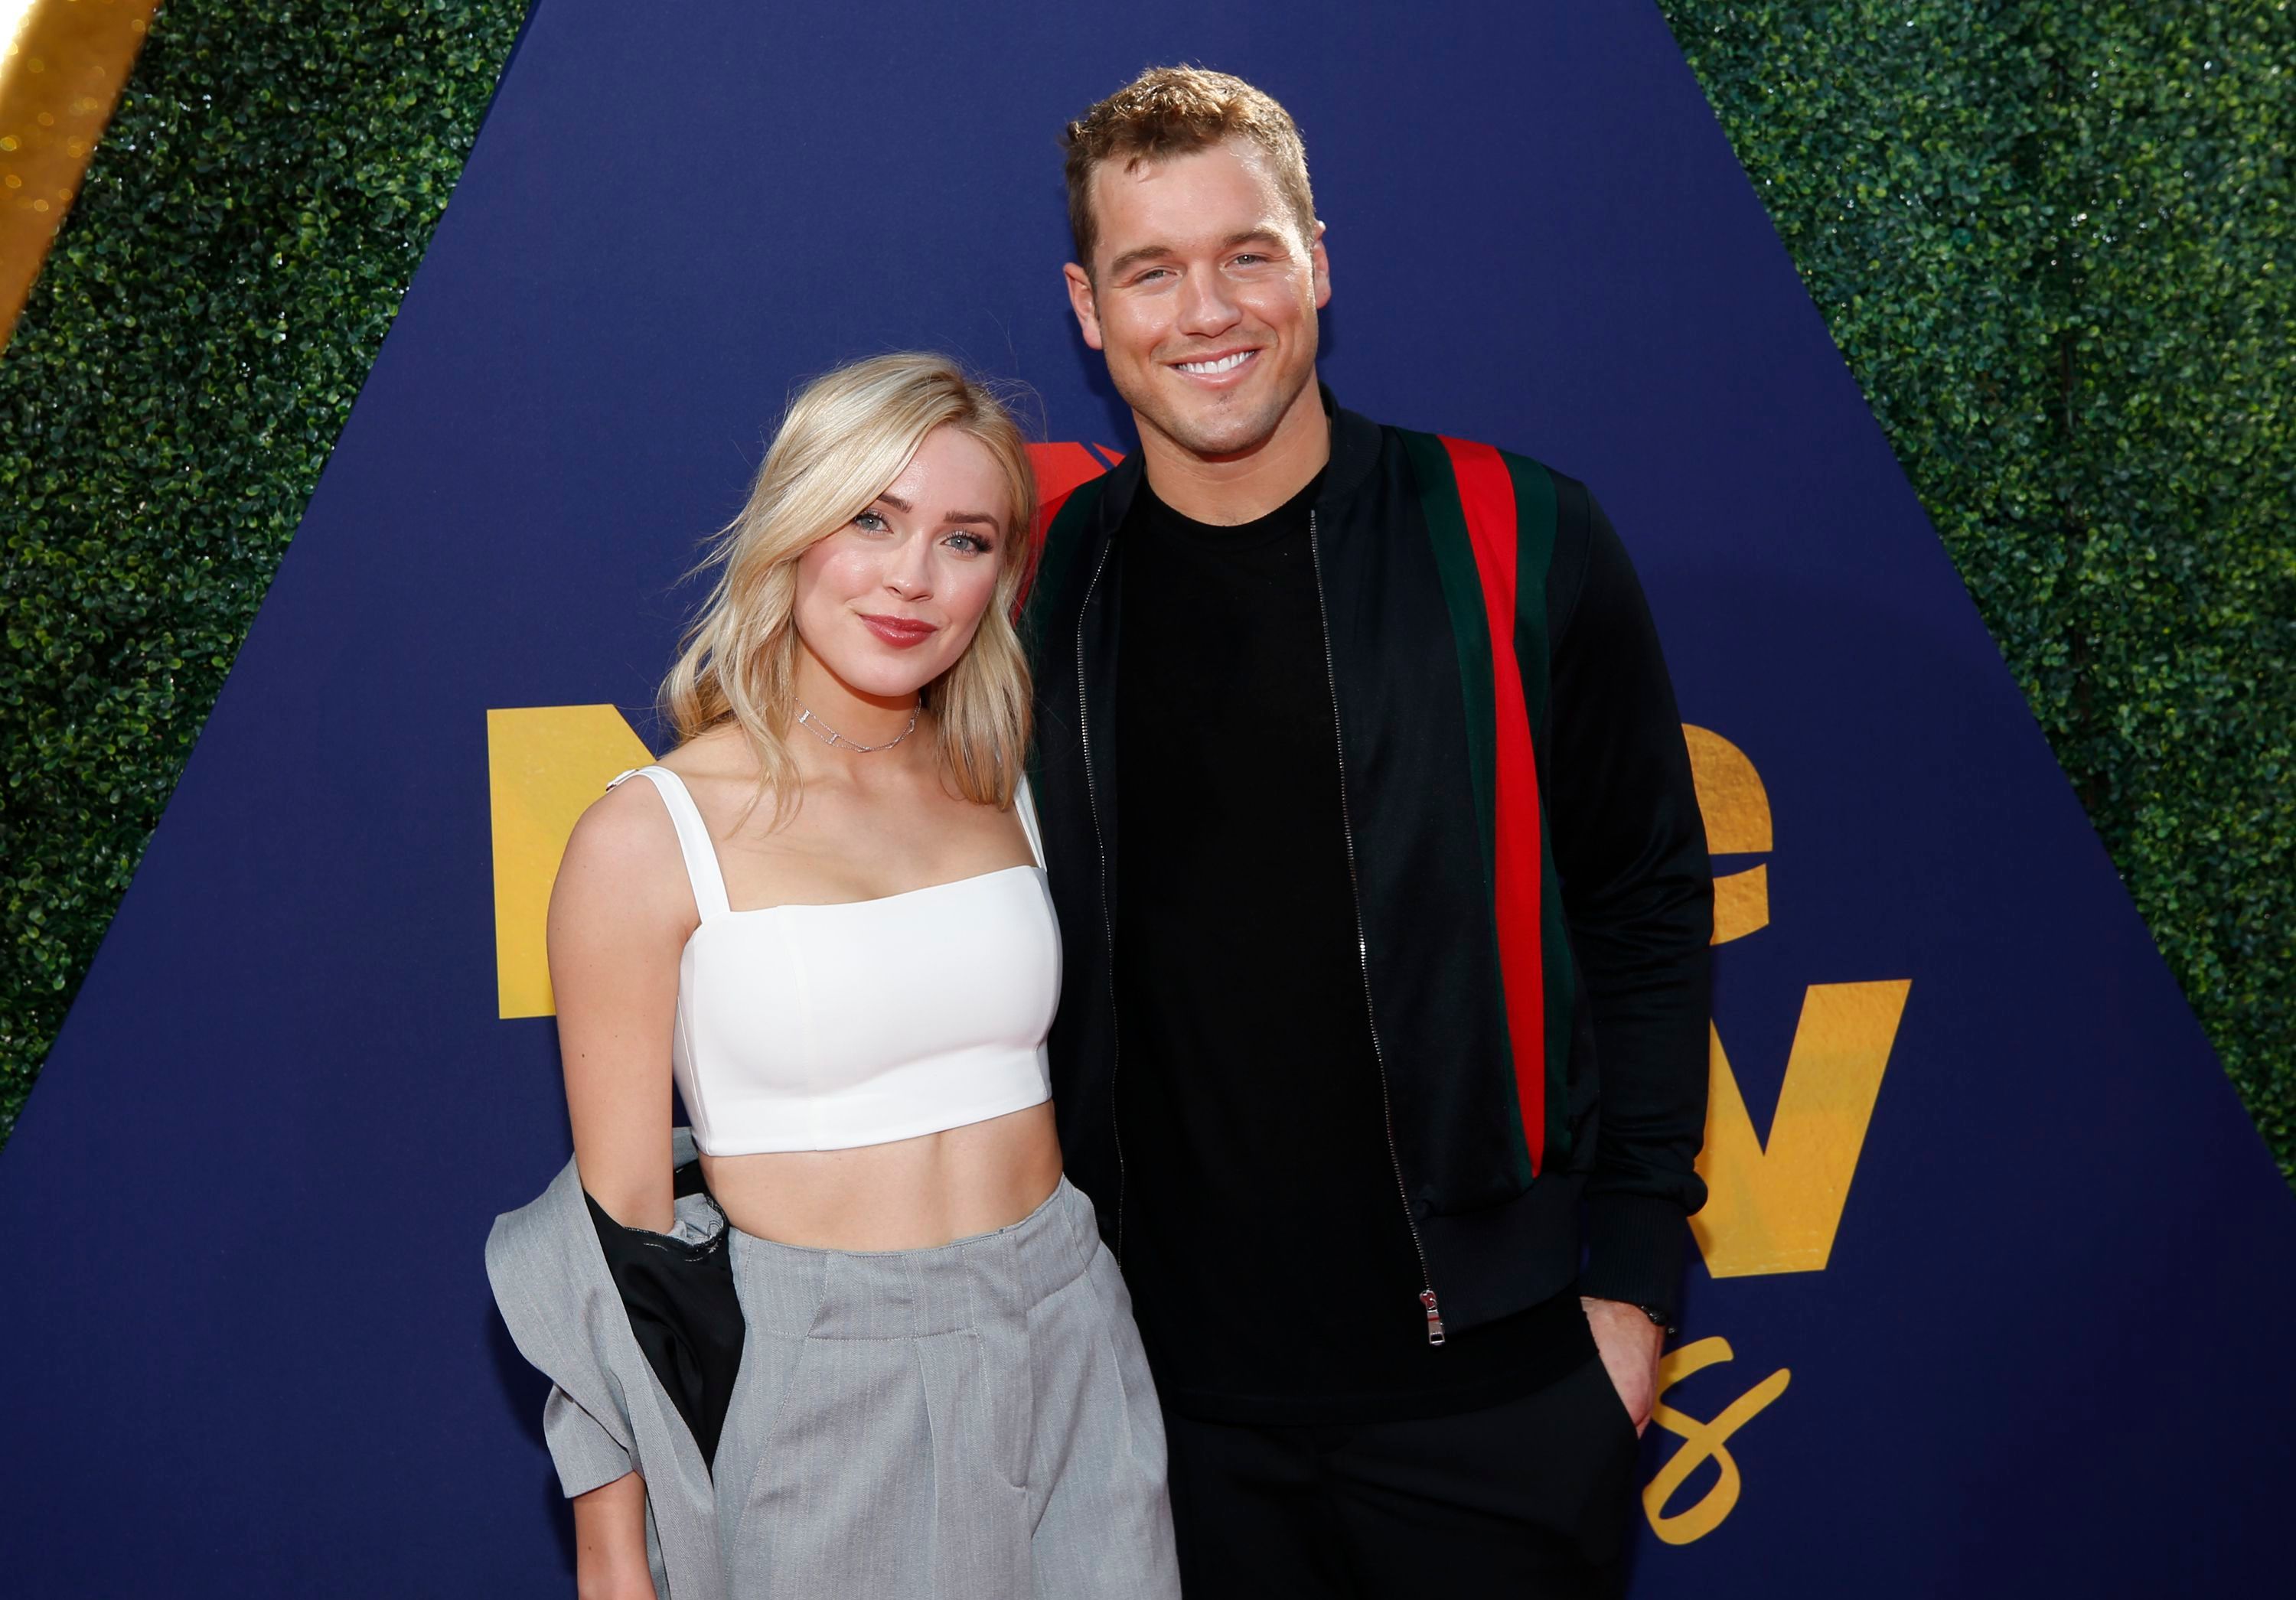 'The Bachelor':Are Colton Underwood and Cassie Randolph still together after ‘The Bachelor’? 